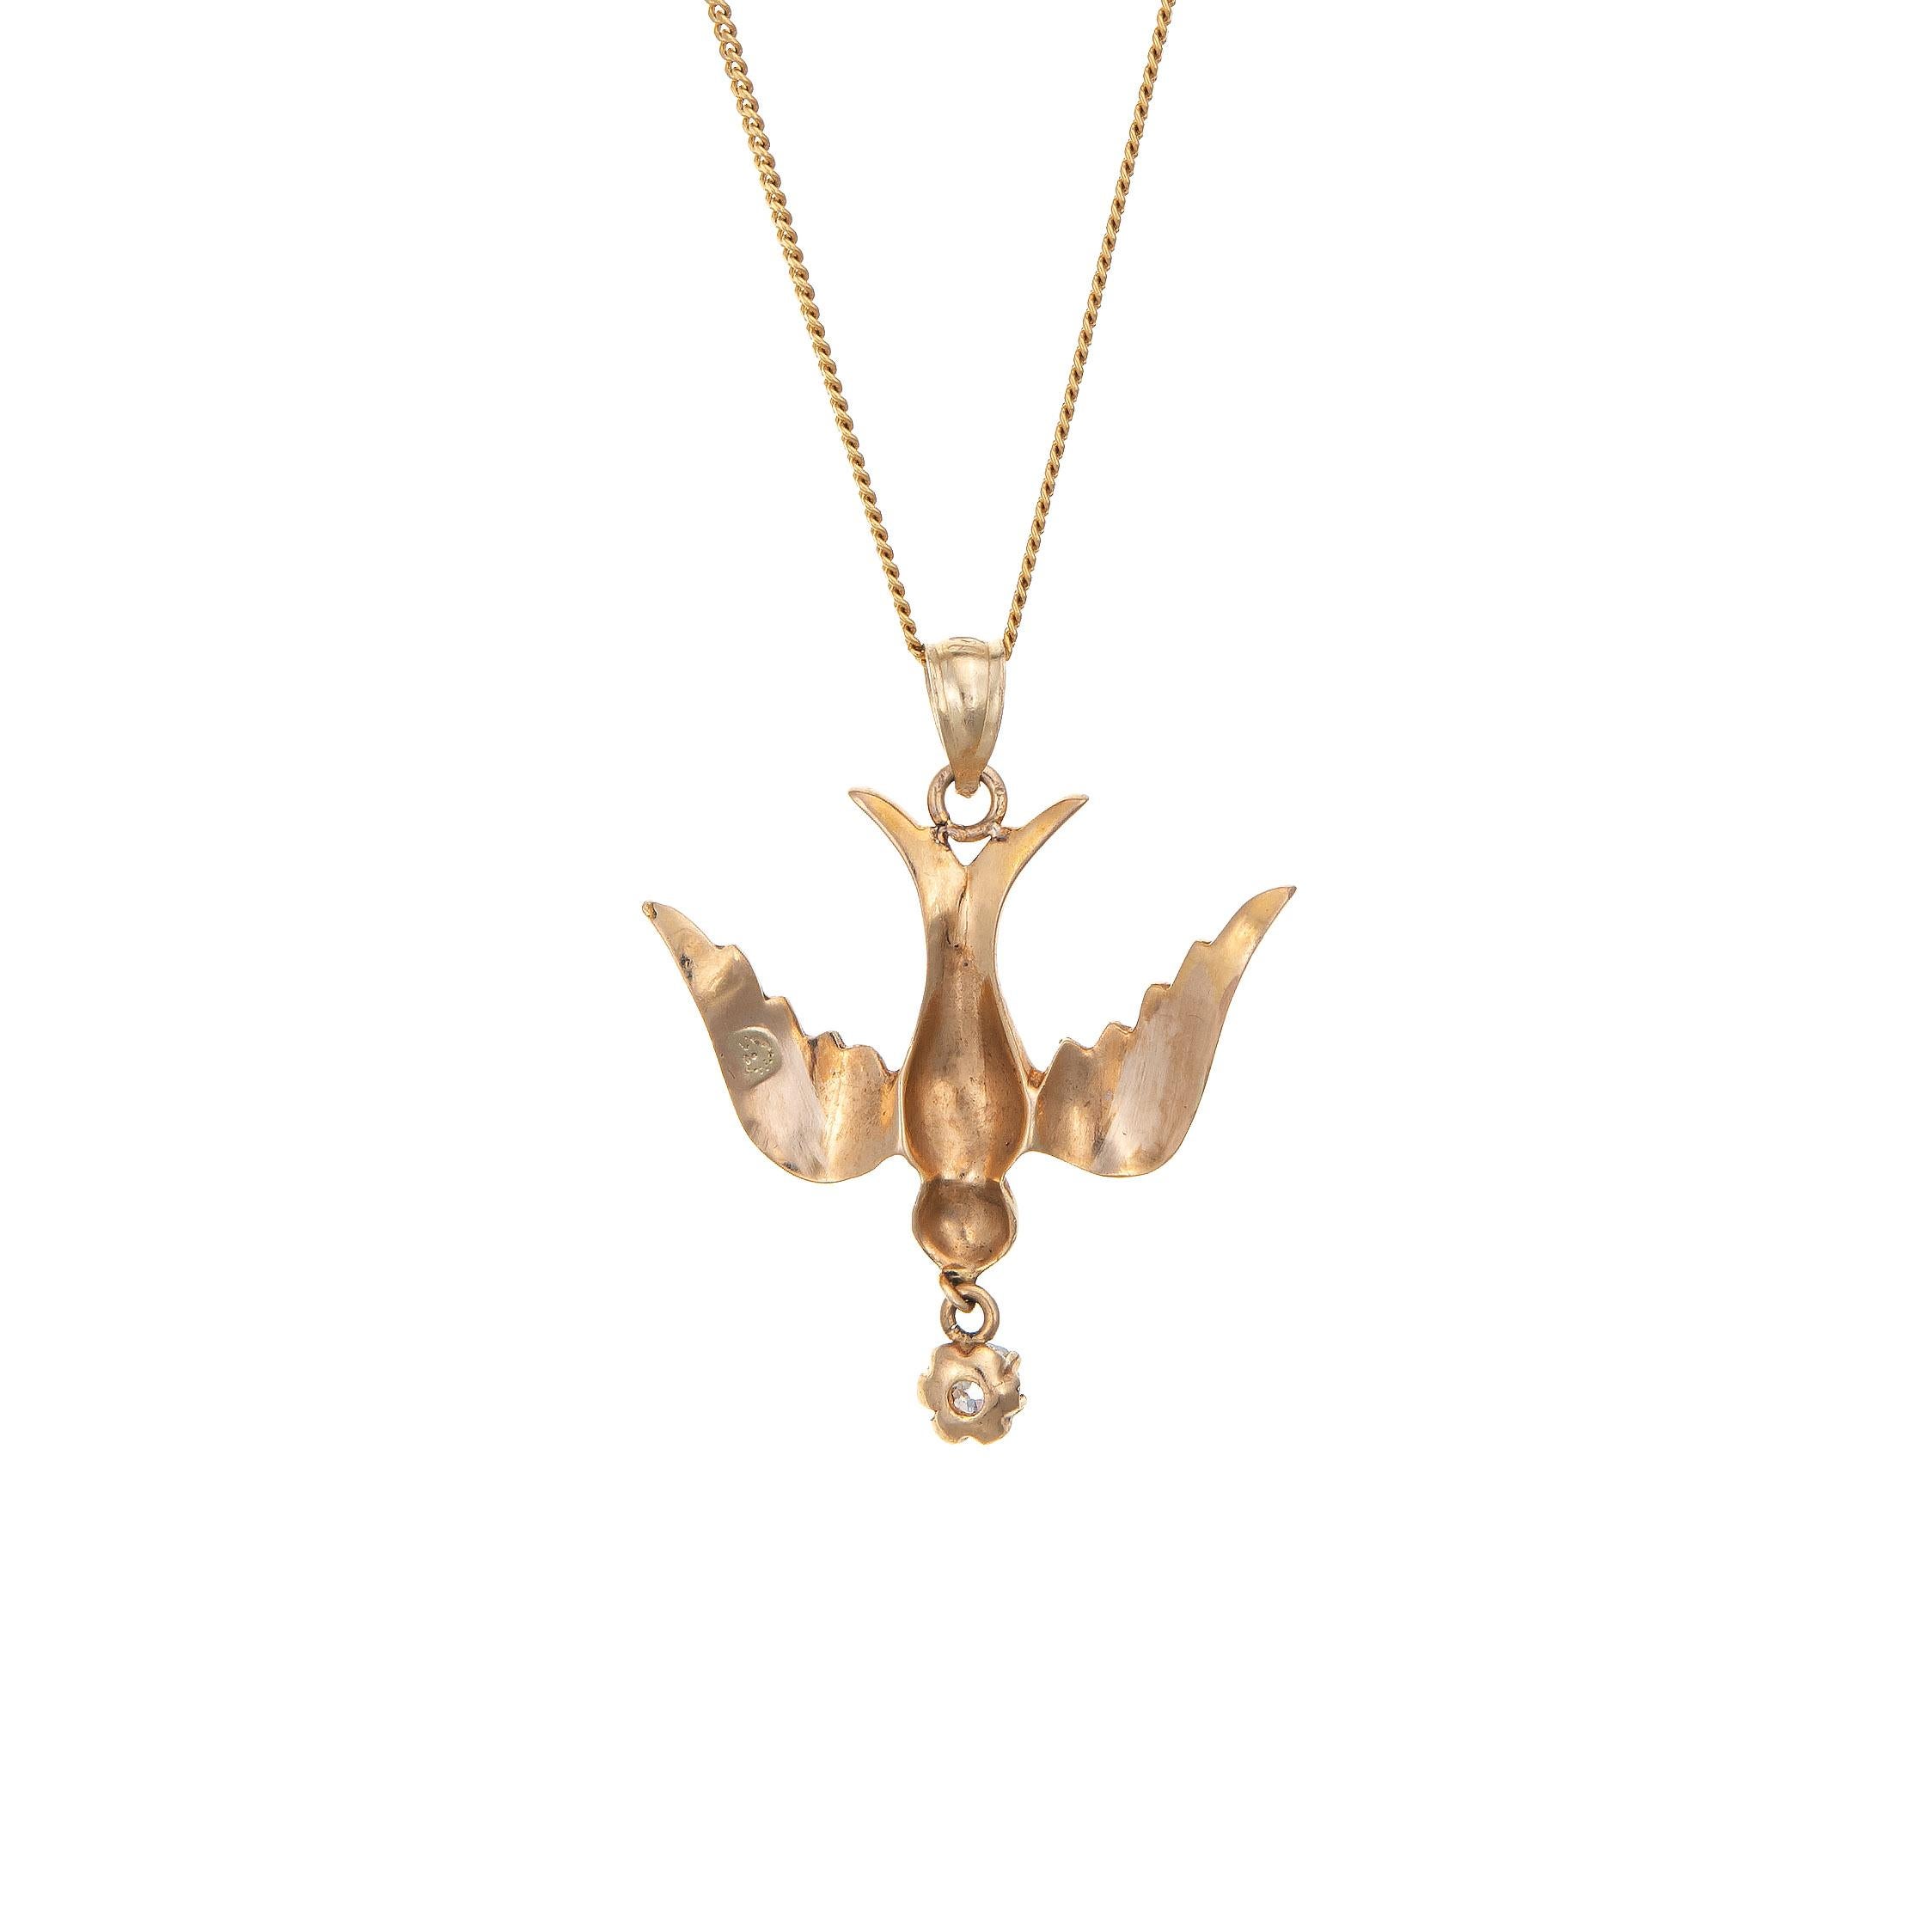 Elegant and finely detailed antique Victorian swallow pendant & necklace (circa 1880s to 1900s), crafted in 14k yellow gold. 

One estimated 0.15 carat old mine cut diamond is estimated at J-K color and SI2 clarity. The seed pearls measure (average)